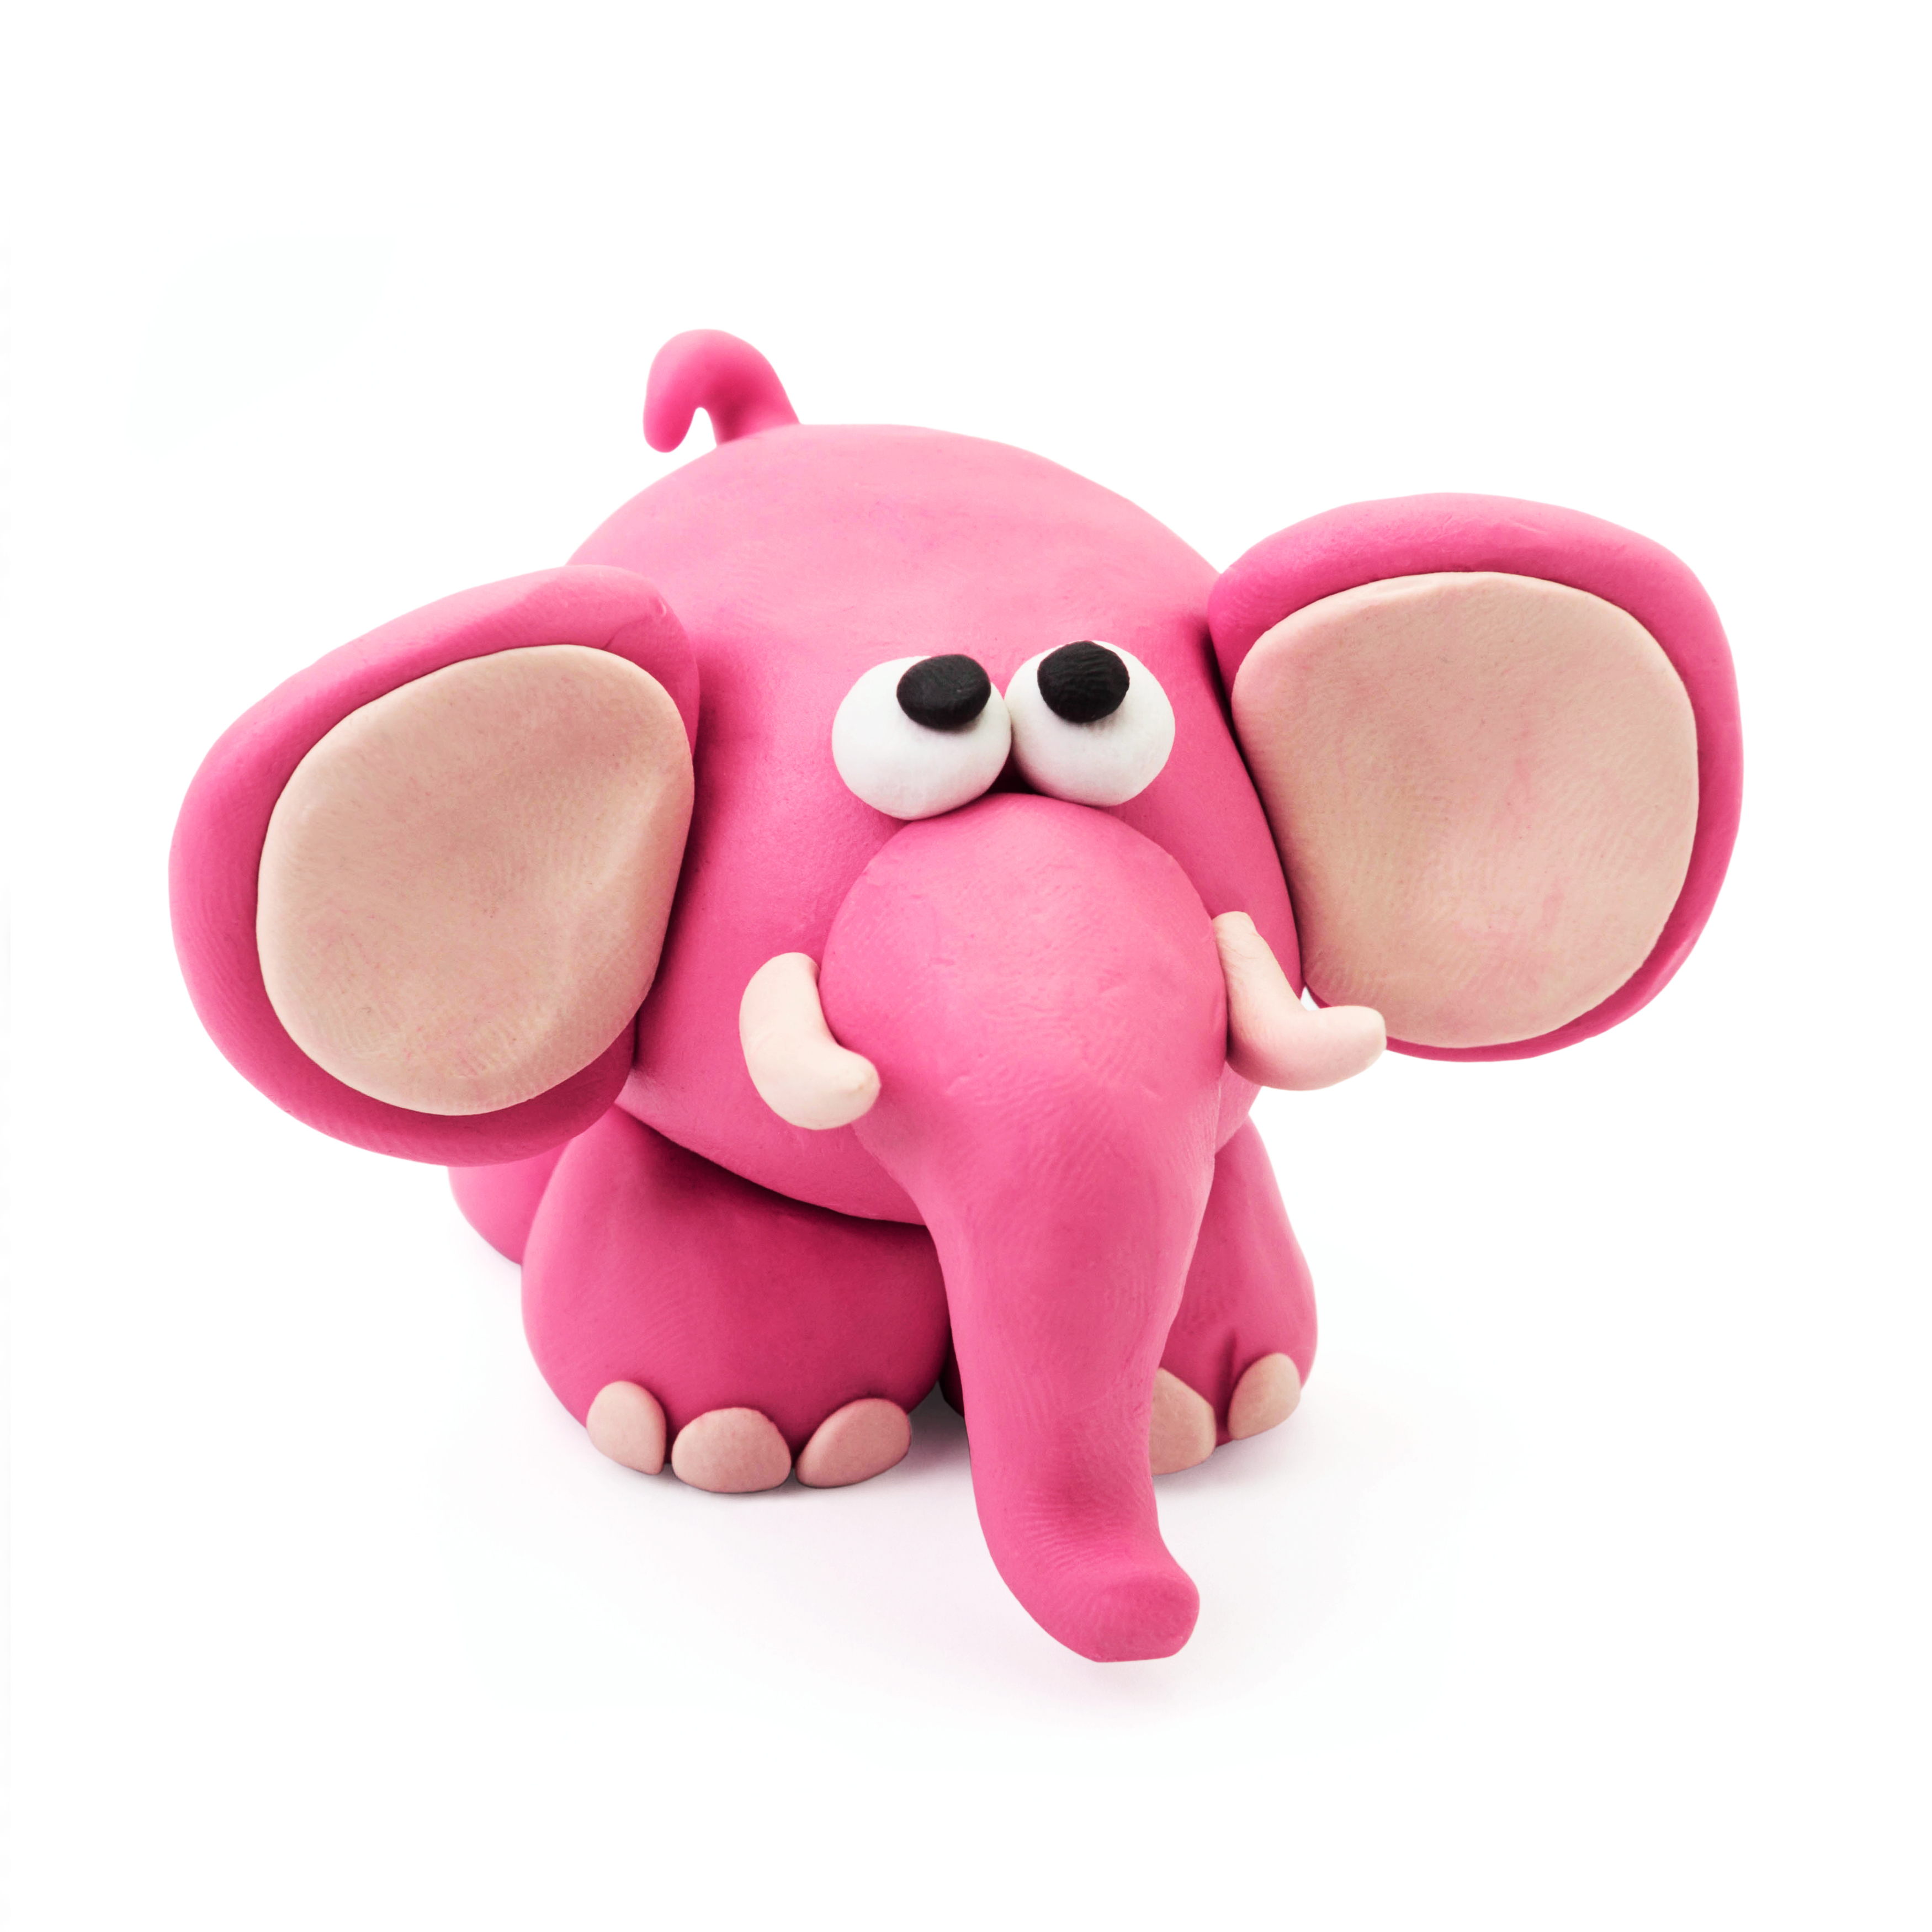 Whatever you do, don't think about a pink elephant. Instead think about want you want to change a habit or behaviour